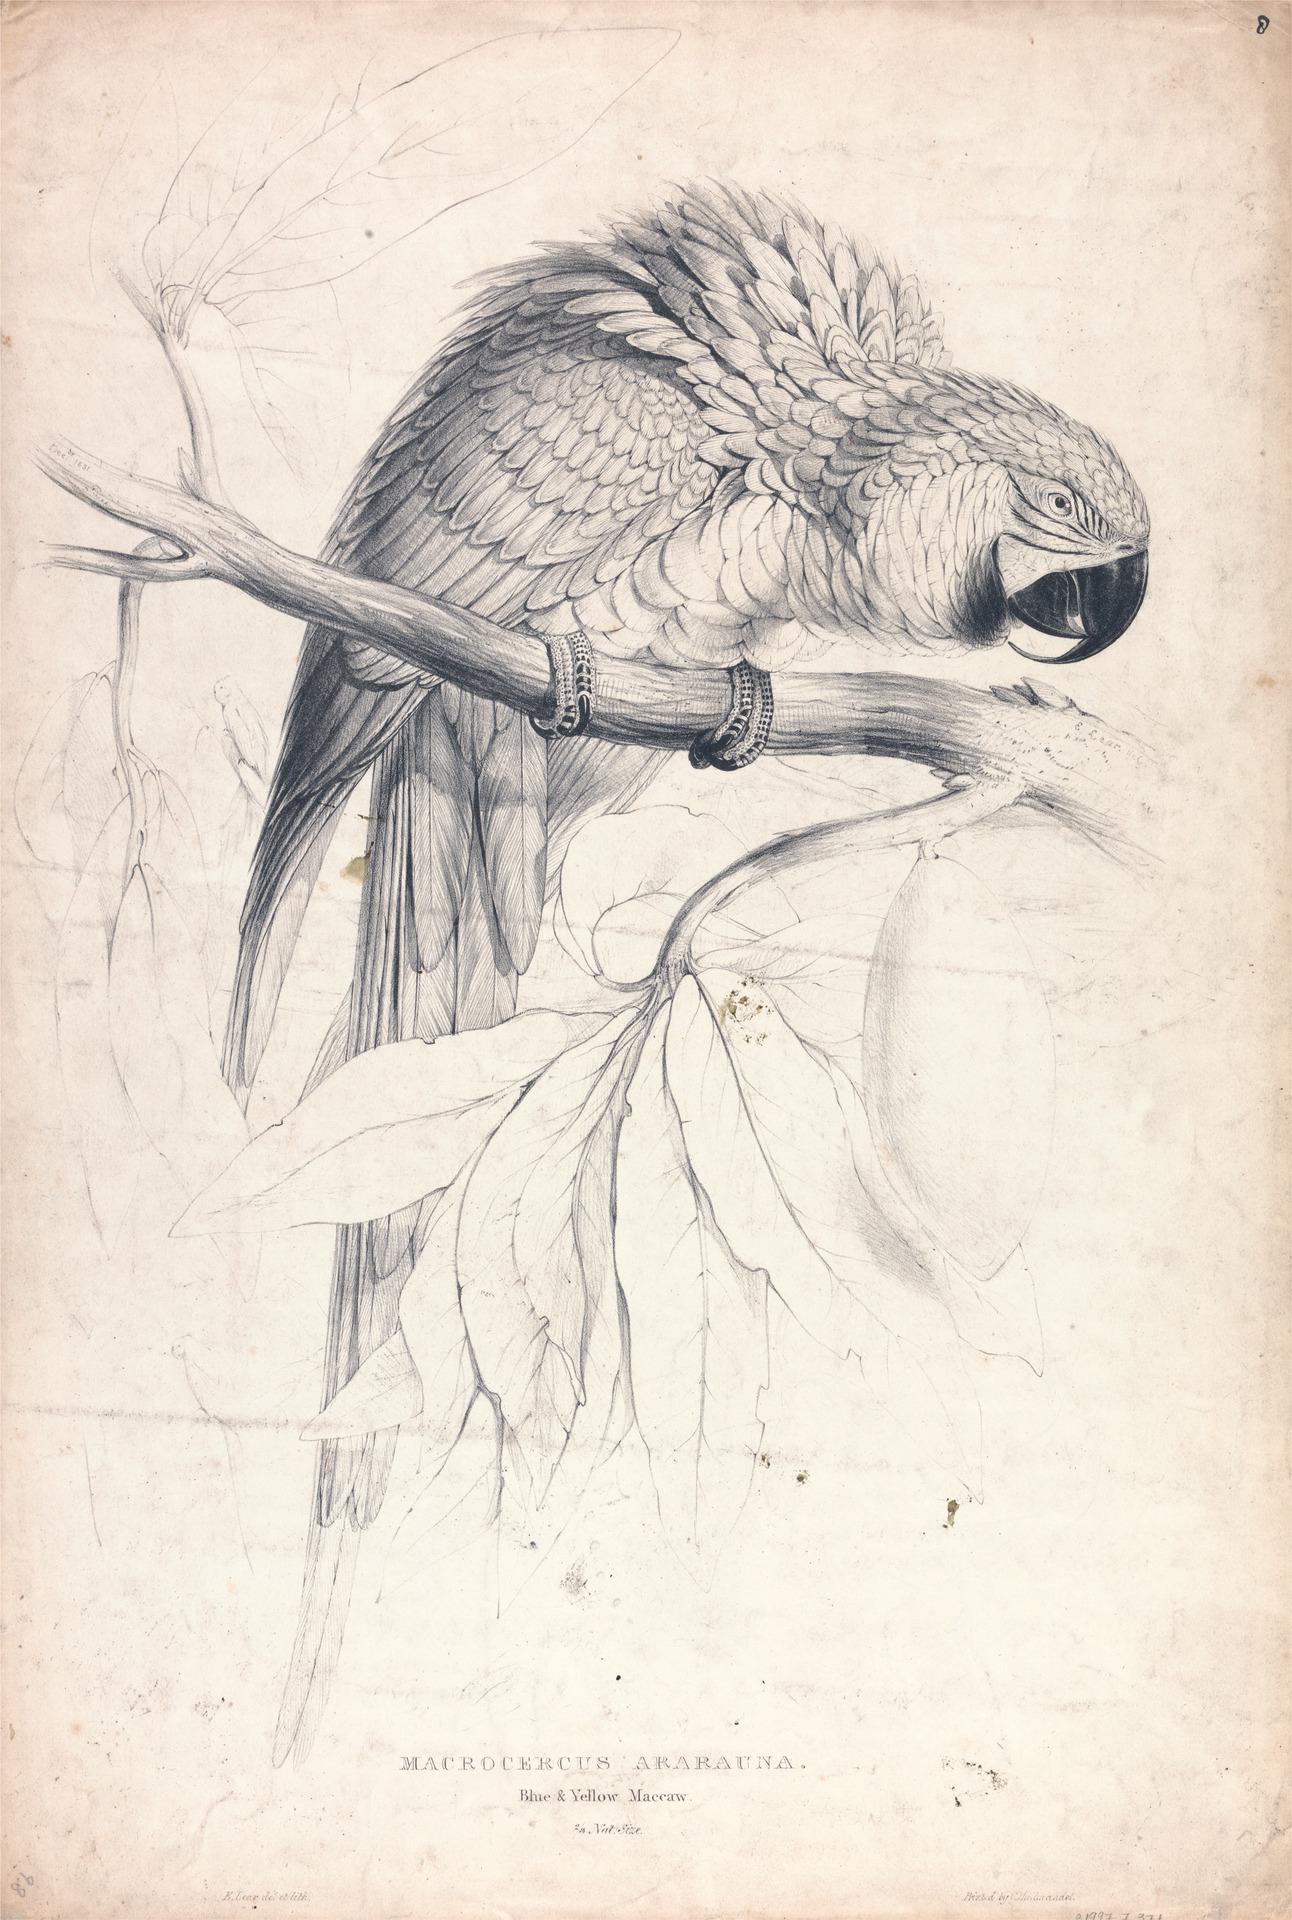 An illustration of a parrot on a tree branch